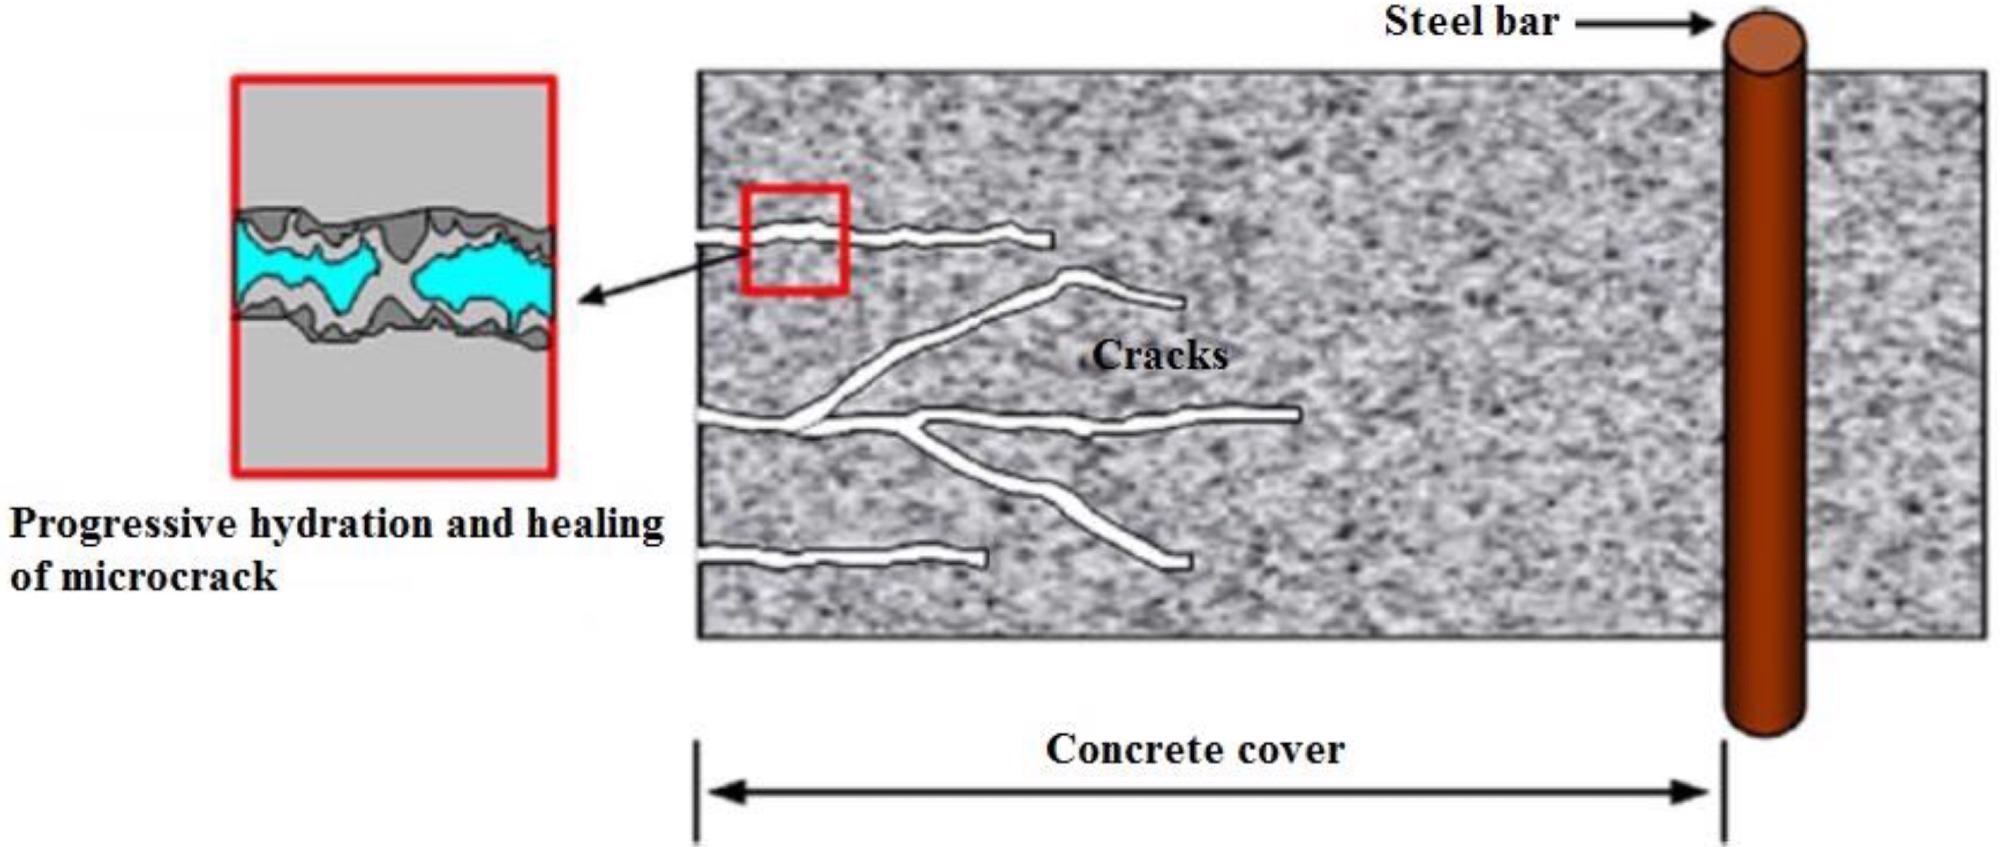 Healing process of micro-cracks in concrete cover because of unhydrated cement nuclei-assisted continued hydration.